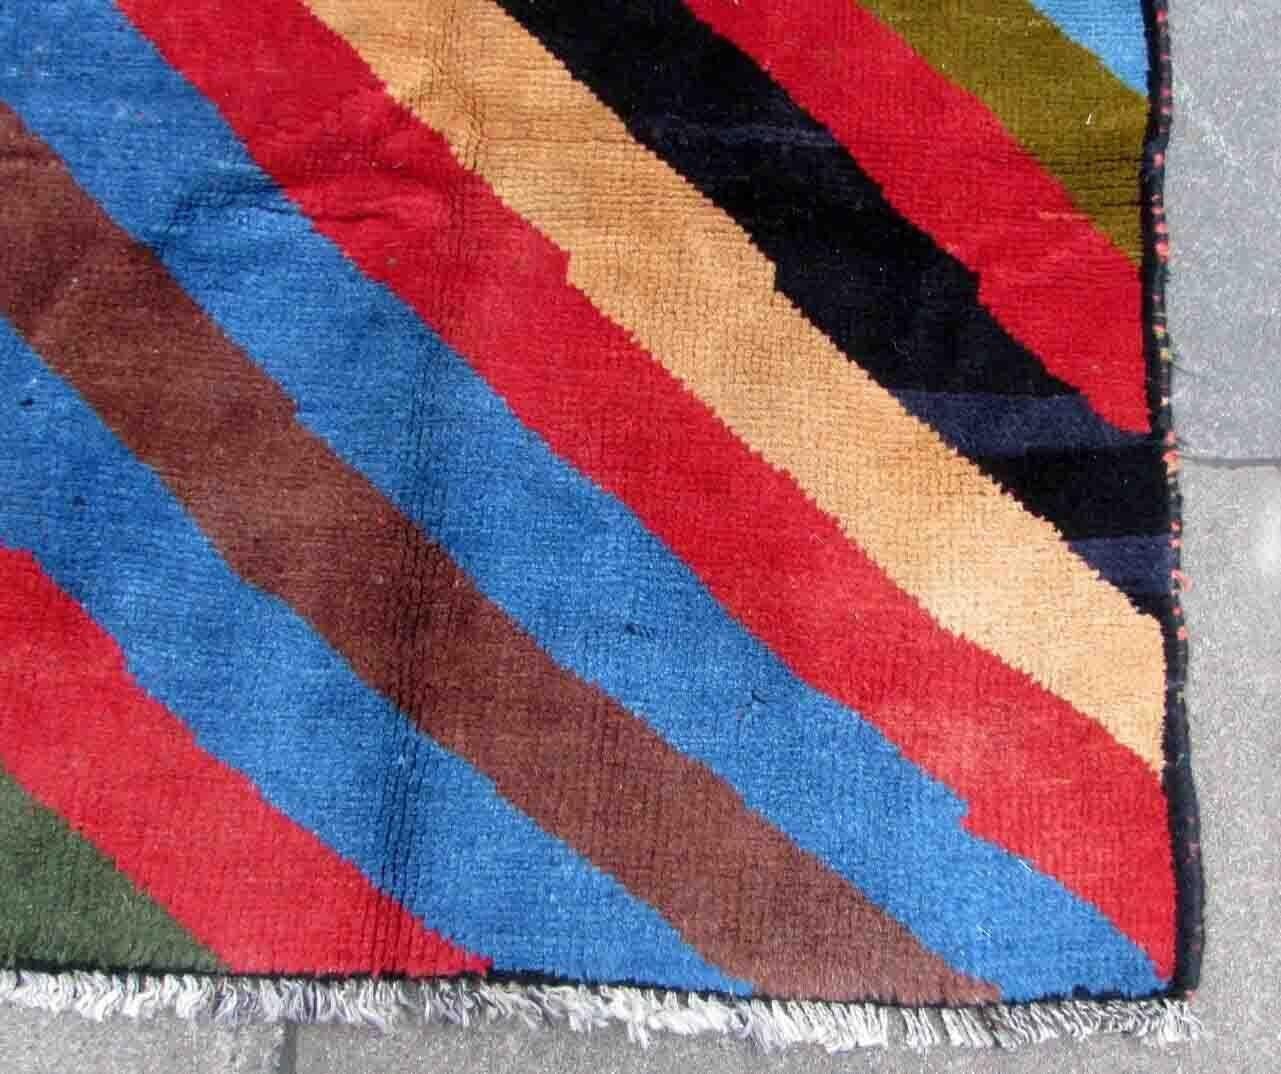 Handmade vintage Gabbeh rug in colorful geometric striped design. The rug is from the end of 20th century in original good condition.

-Condition: original good,

-circa: 1970s,

-Size: 3.8' x 4.8' (117cm x 147cm),

-material: